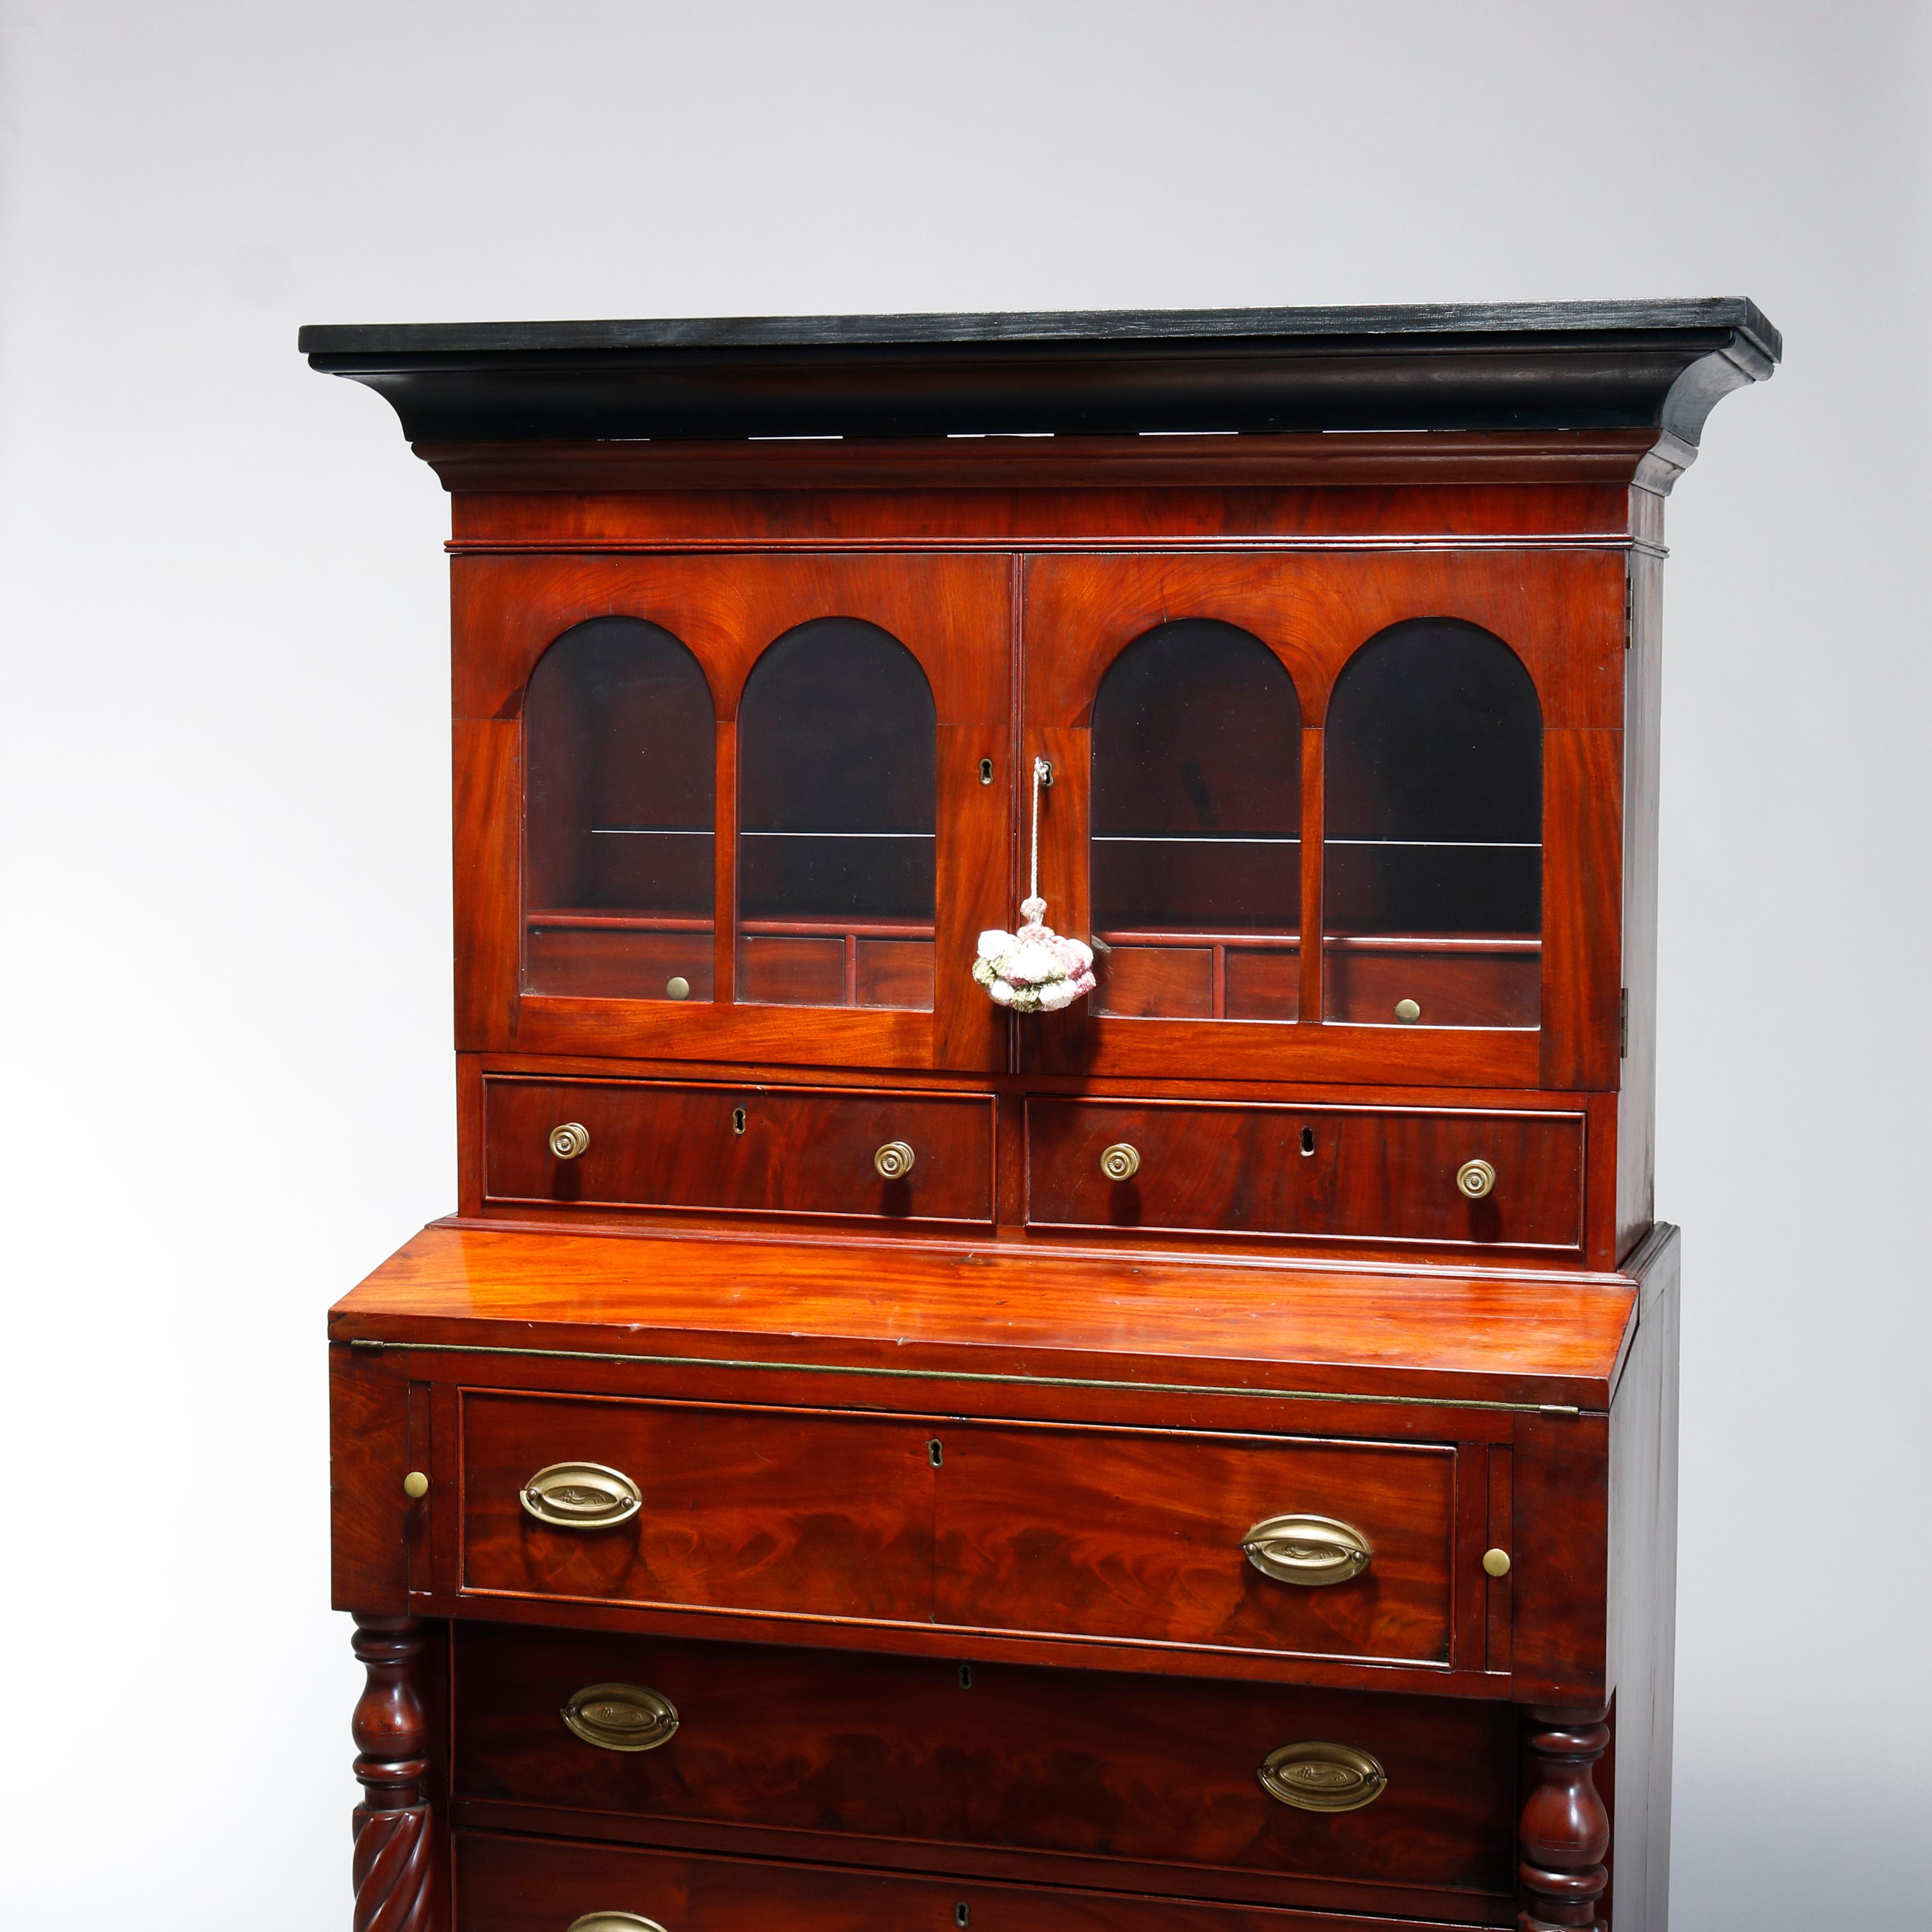 An antique Sheraton secretary offers flame mahogany construction and upper step-back bookcase with double doors having arched windows opening to shelved interior with lower drawers over lower case having drop down desk surmounting two long drawers